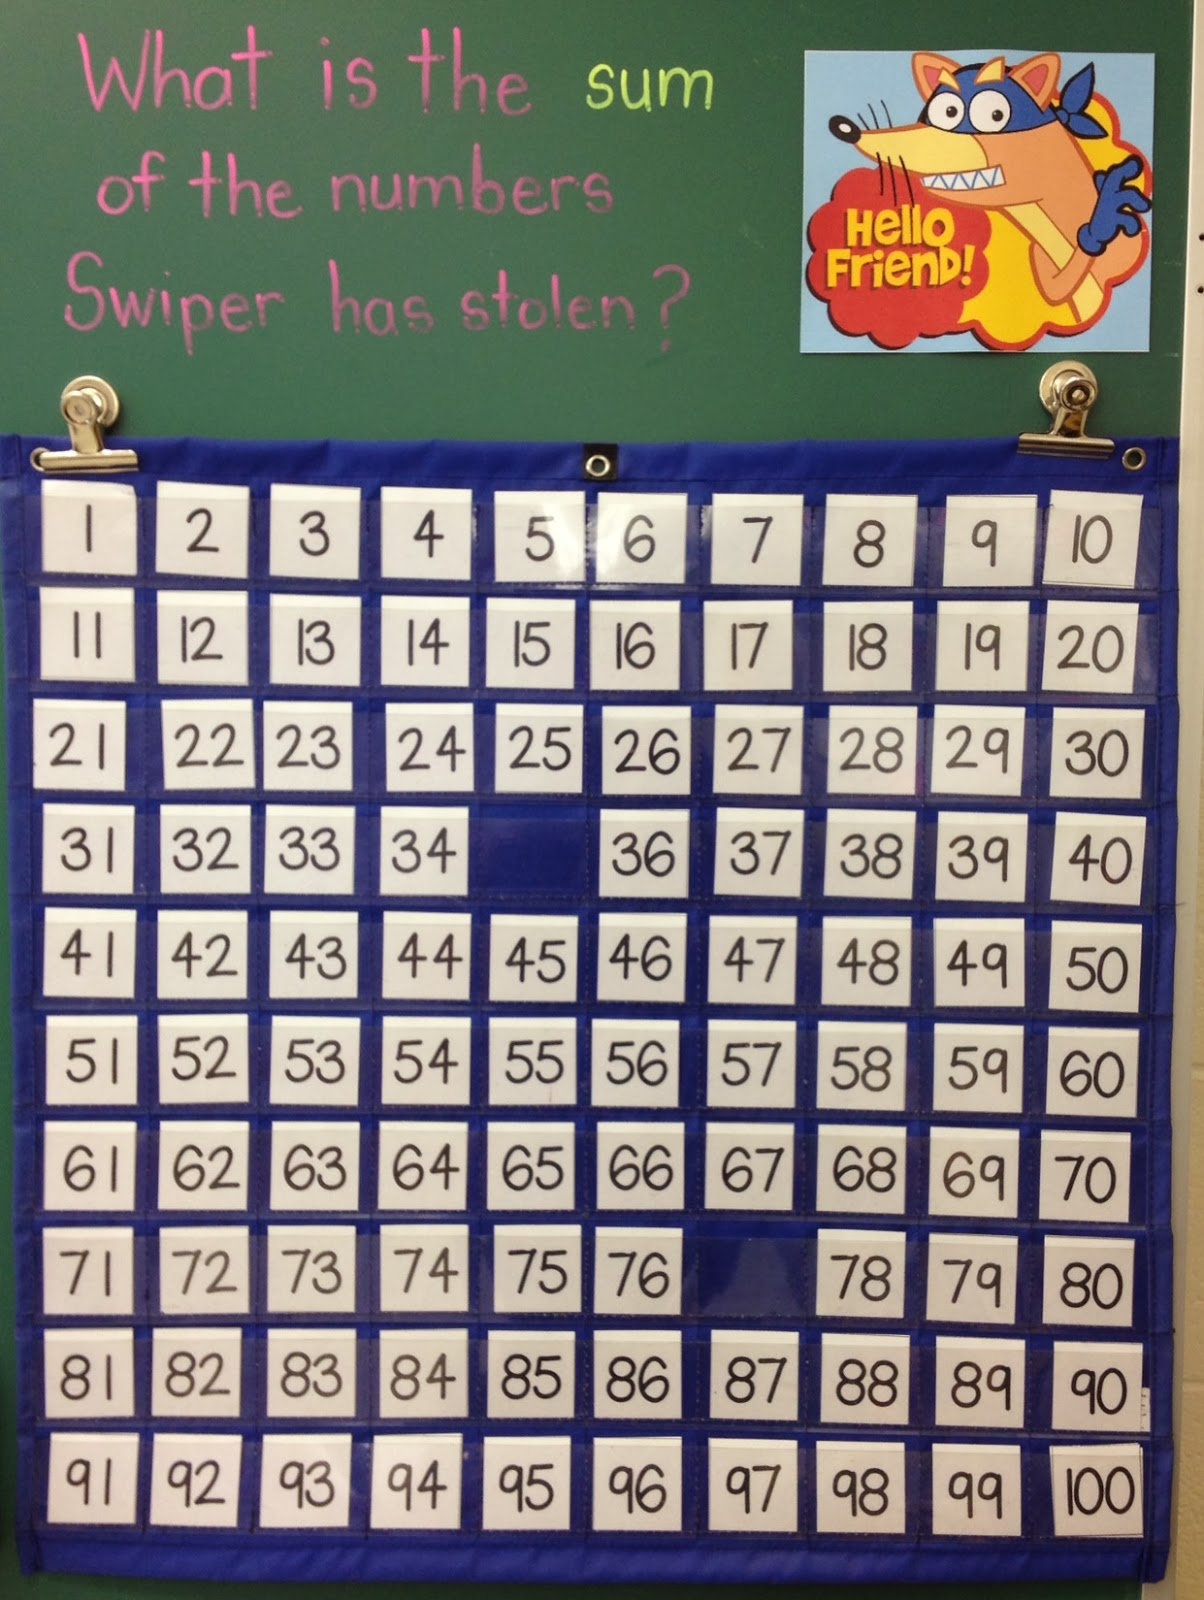 Motivate your students to practice their addition (and subtraction!) skills with this fun addition challenge! Easy to set up with the resources you already have in your classroom. Grab the details and some FREEBIES in this blog post from Mrs. Beattie's Classroom!